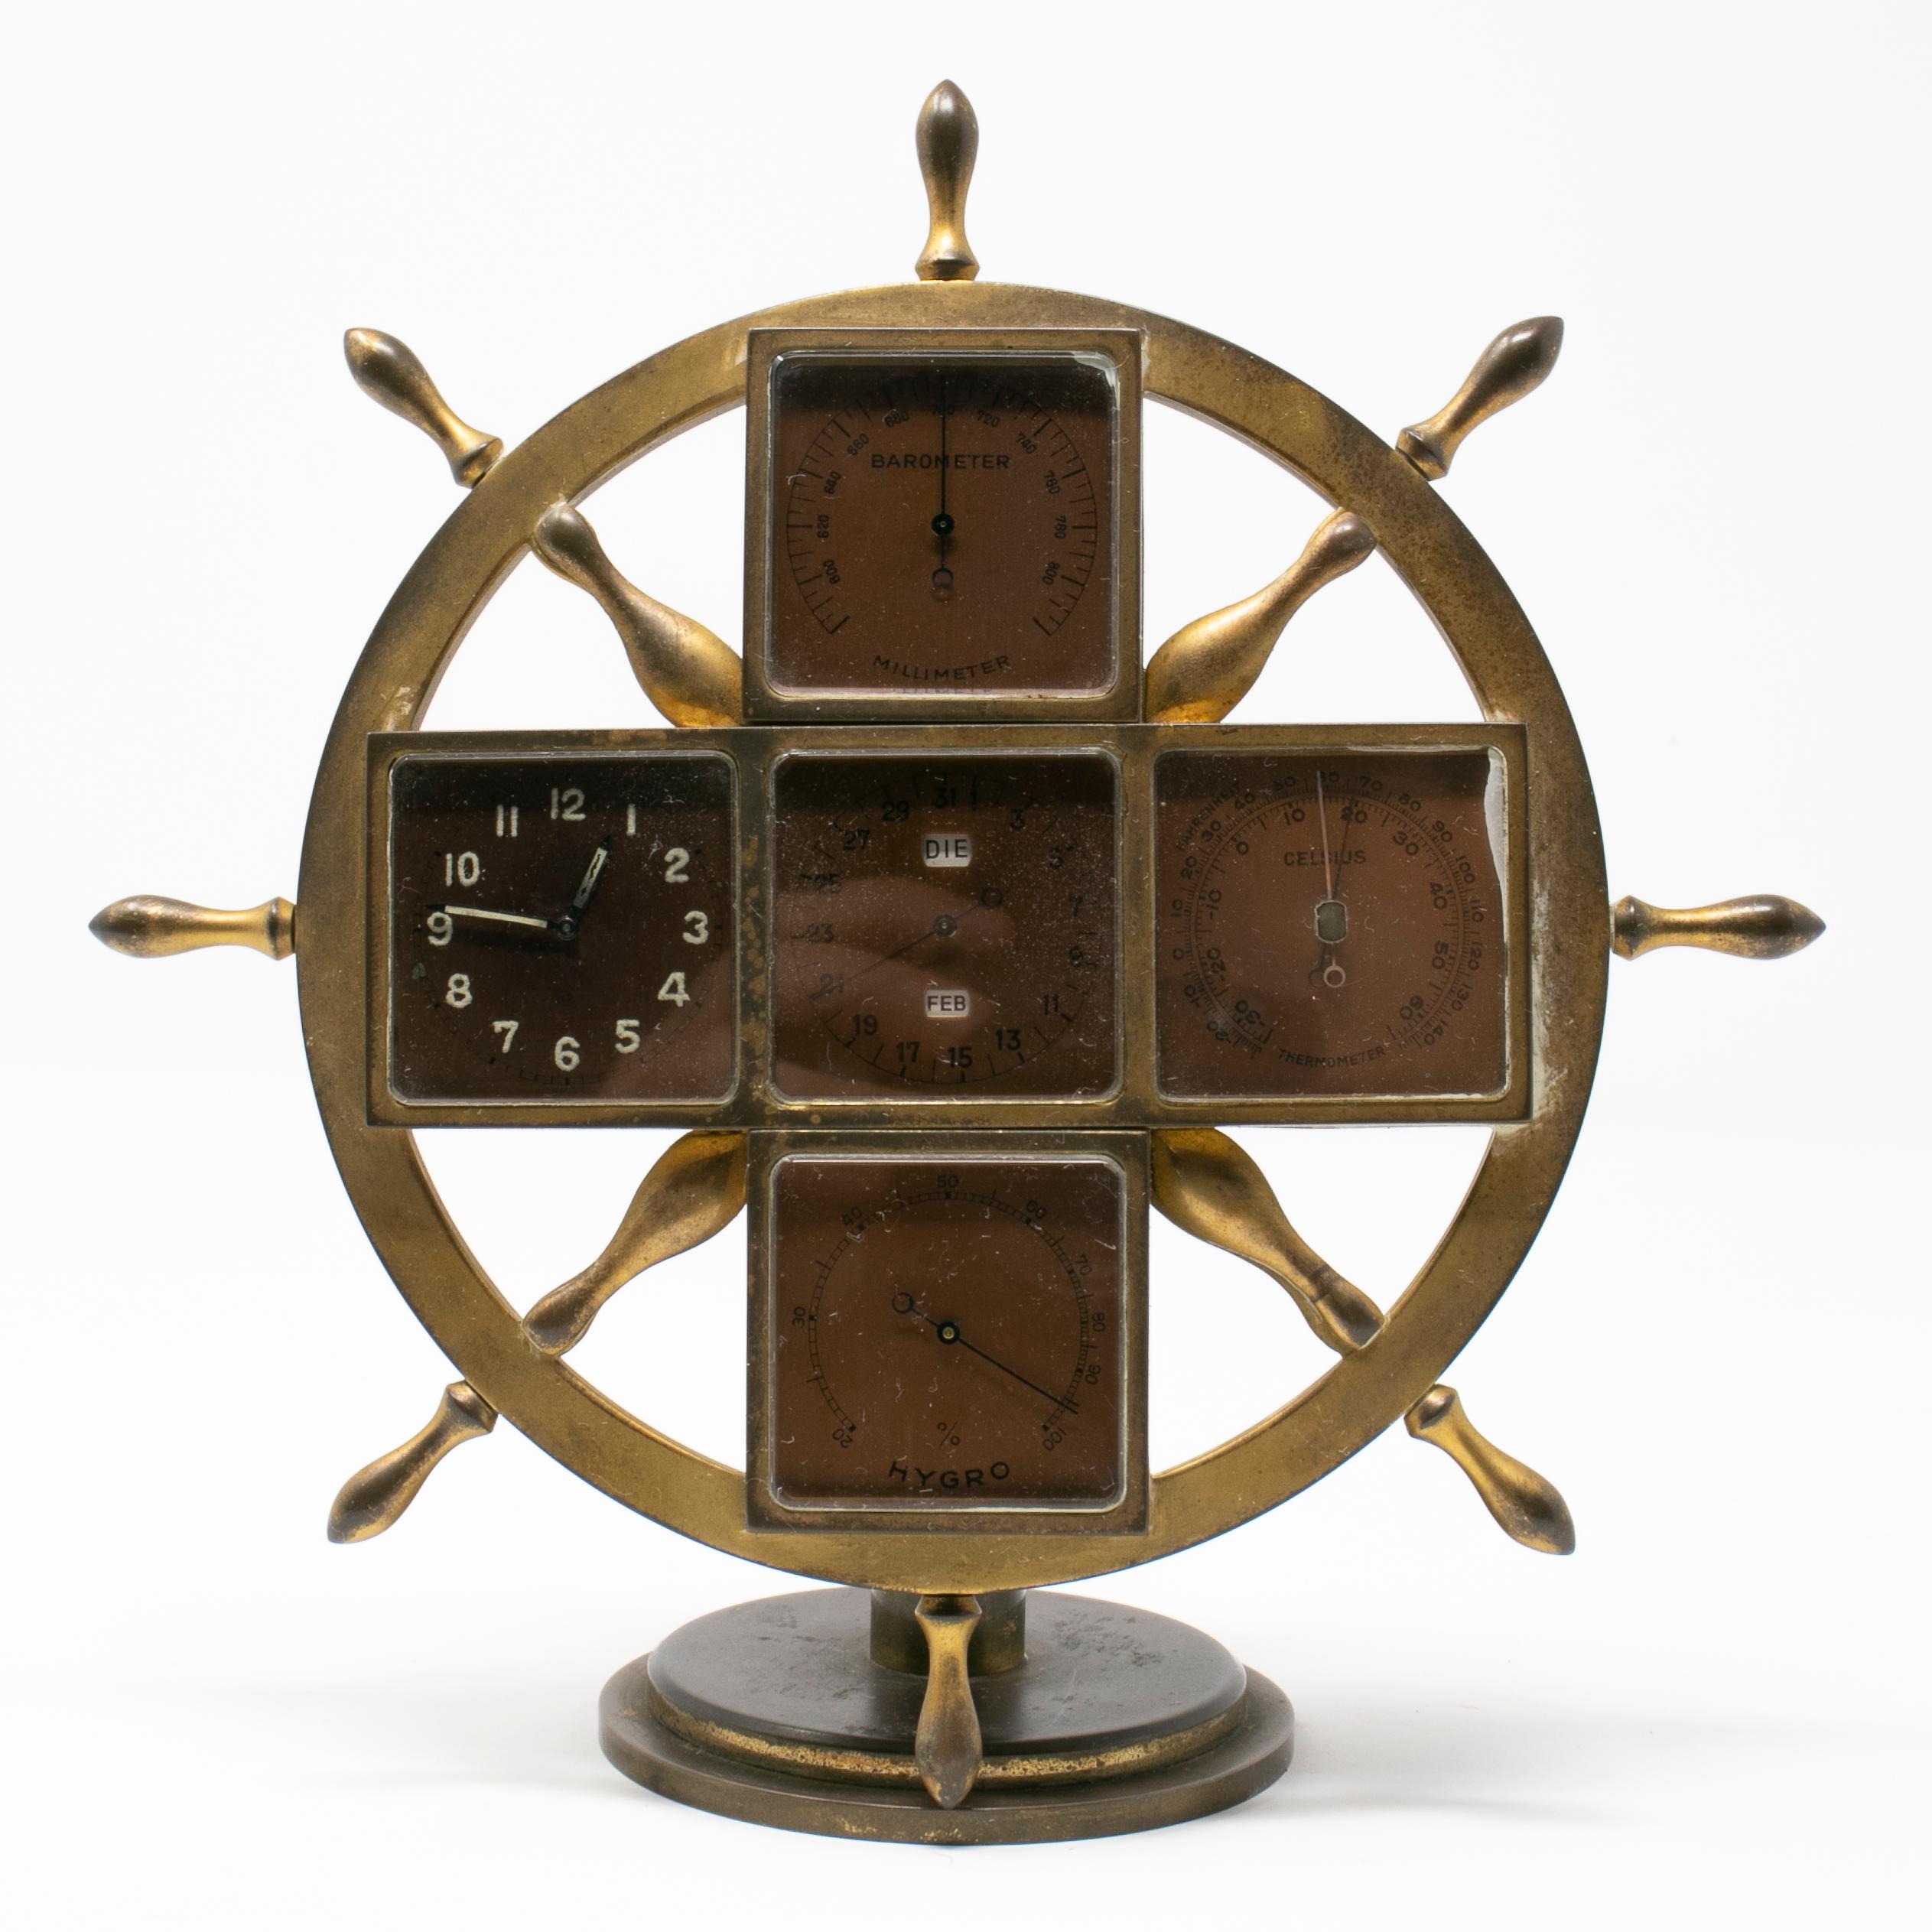 19th century bronze boat captains ship's wheel shaped table clock with several clock faces.